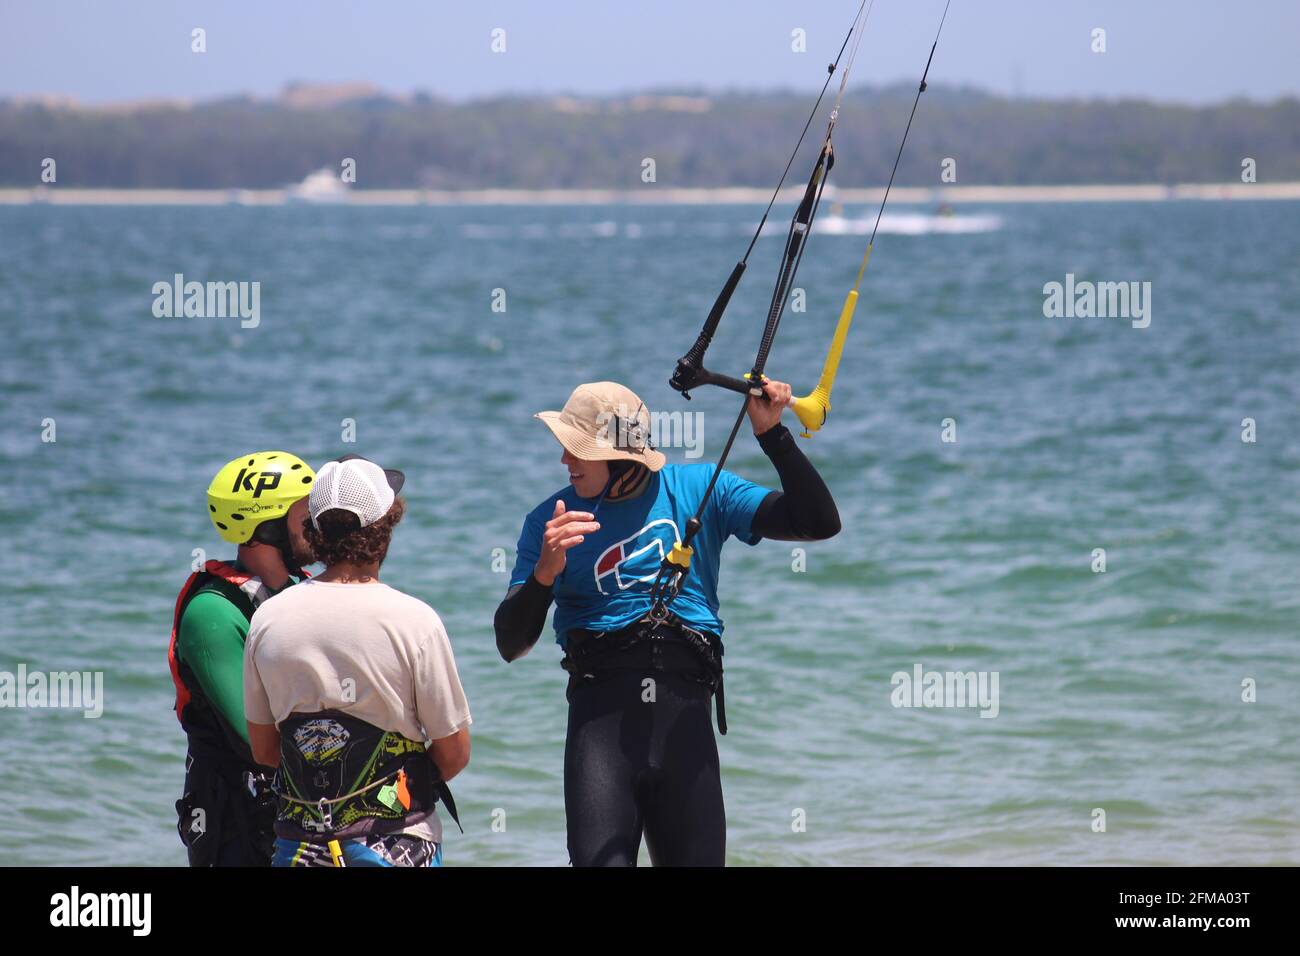 SYDNEY, AUSTRALIA - Dec 12, 2017: Three kite boarders standing on the beach.  One is holding the control bar and speaking to the other two. All are wea  Stock Photo - Alamy